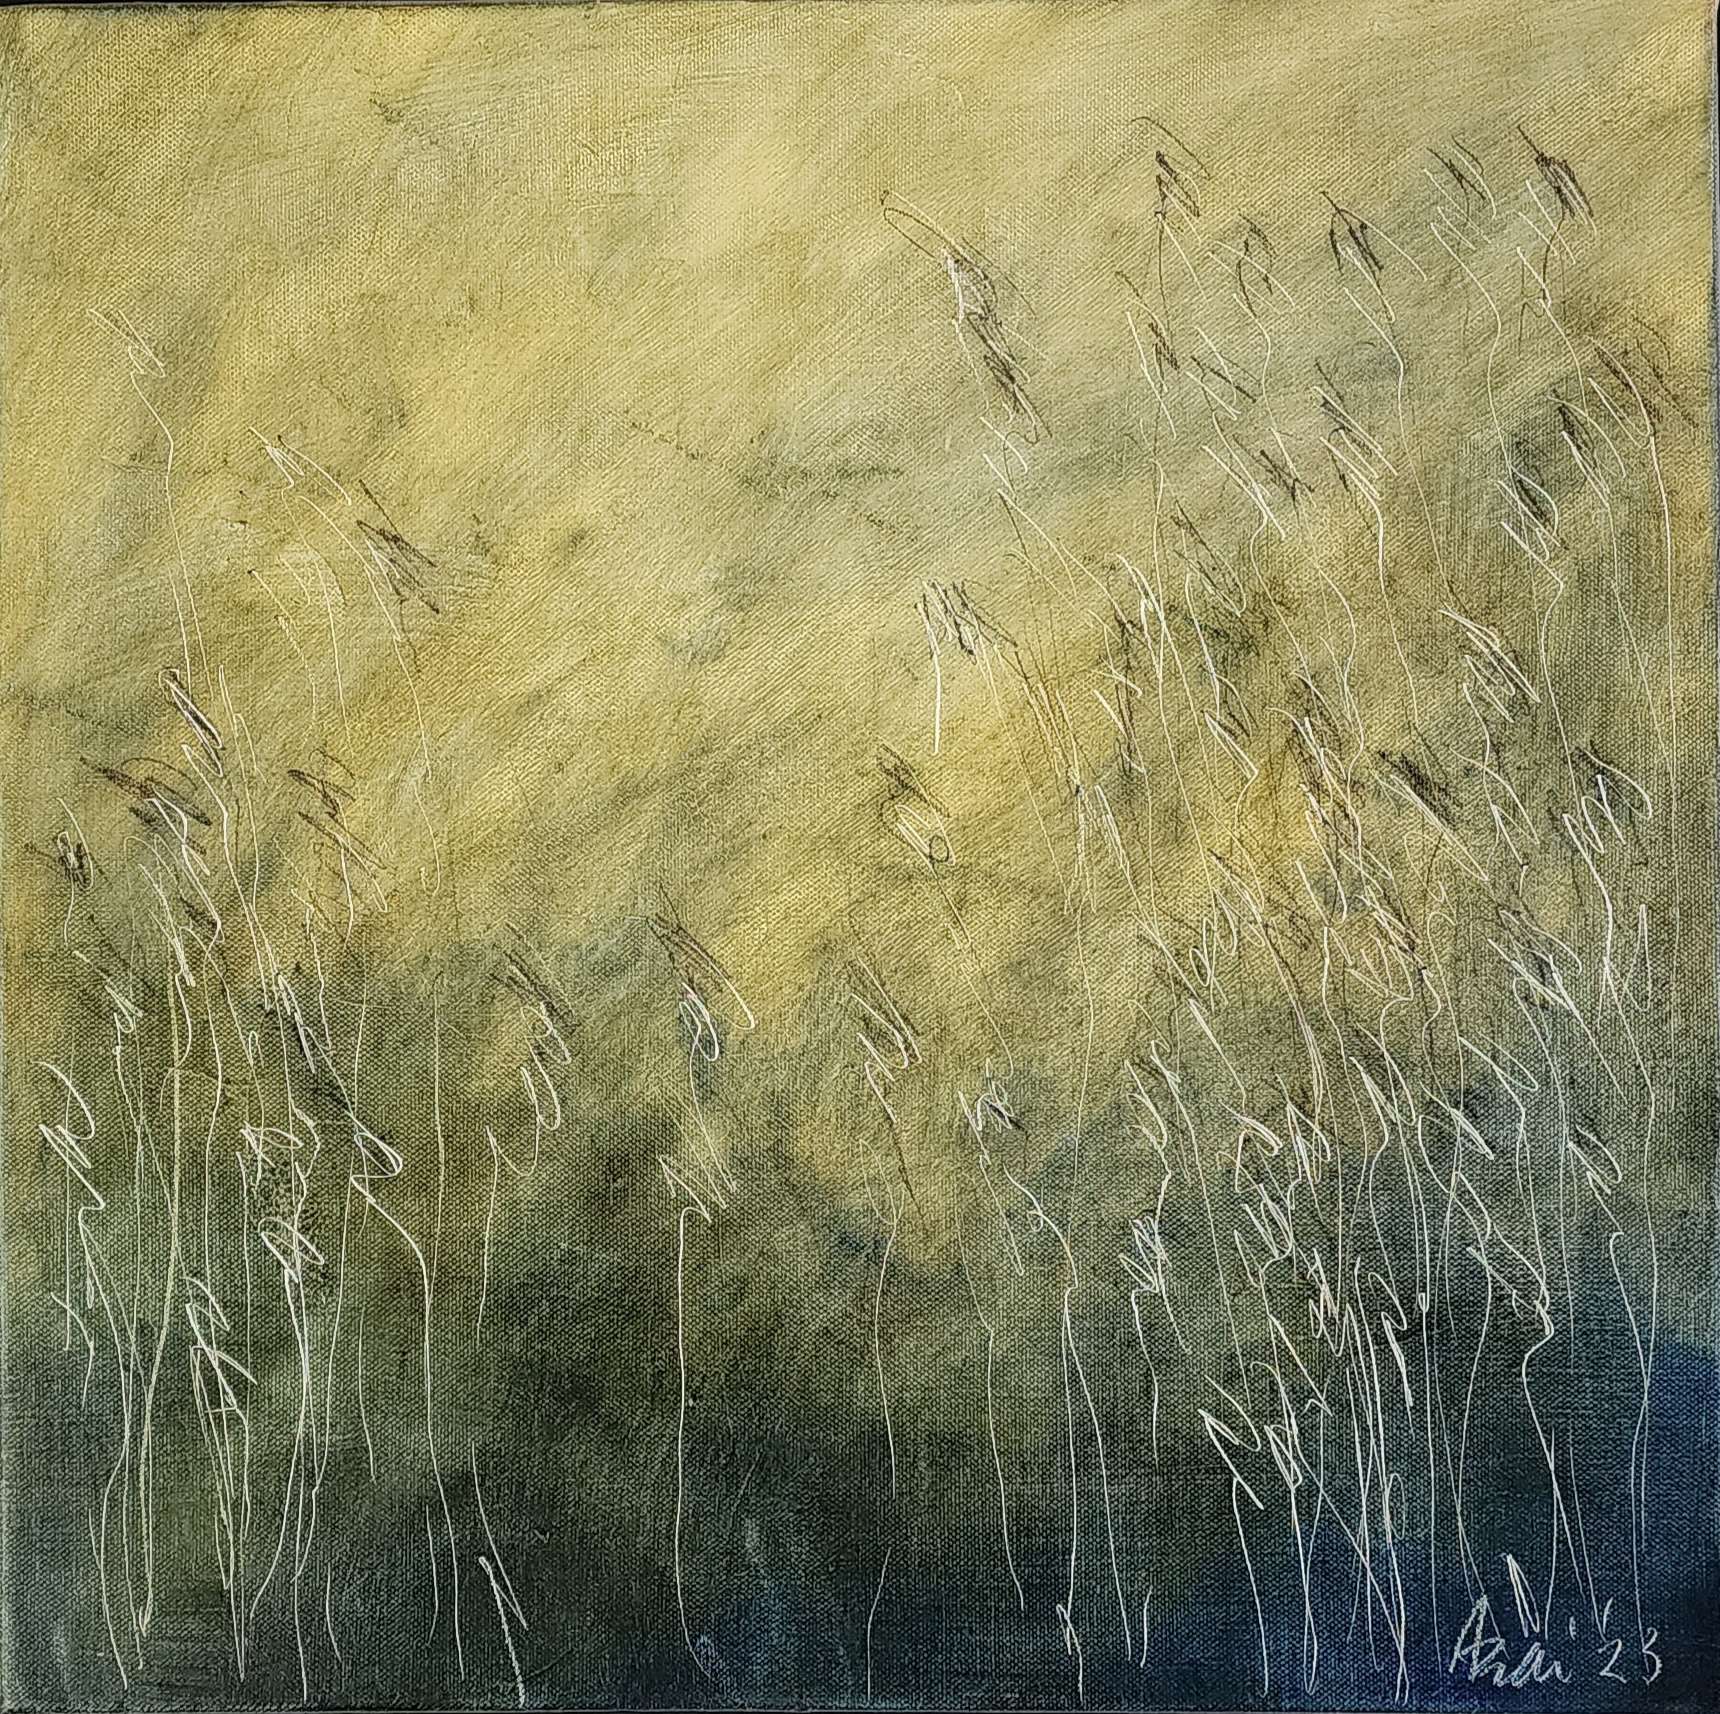 Small Grasses IV, oil and graphite on canvas by Pamela Asai